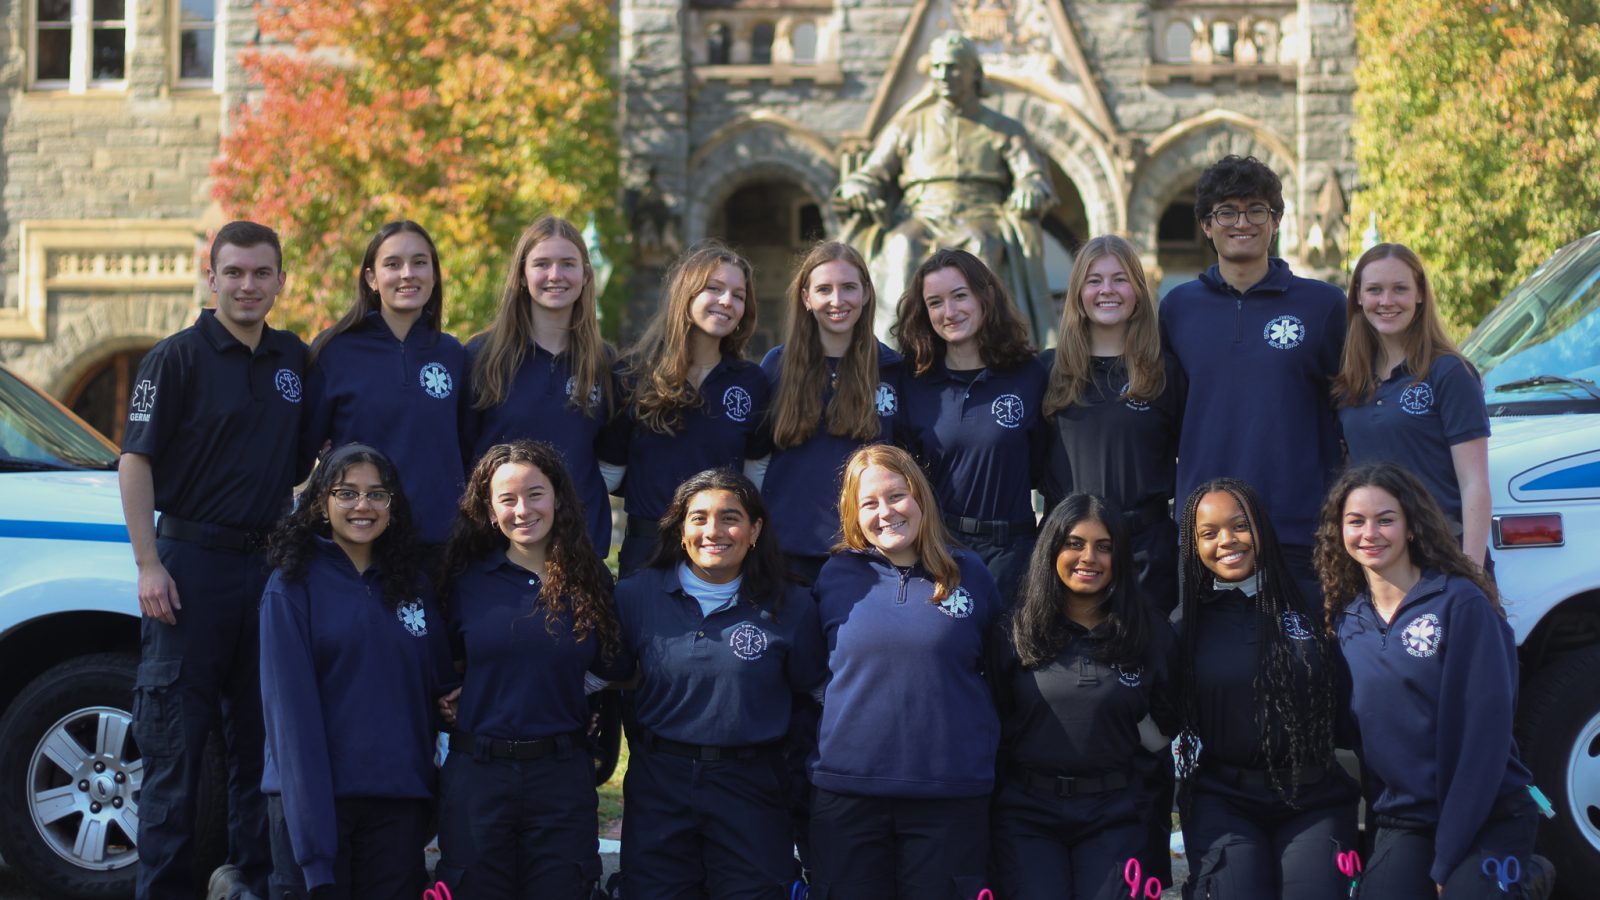 The volunteers for the student-run ambulance service, GERMS, pose together in front of Healy Hall in the fall.